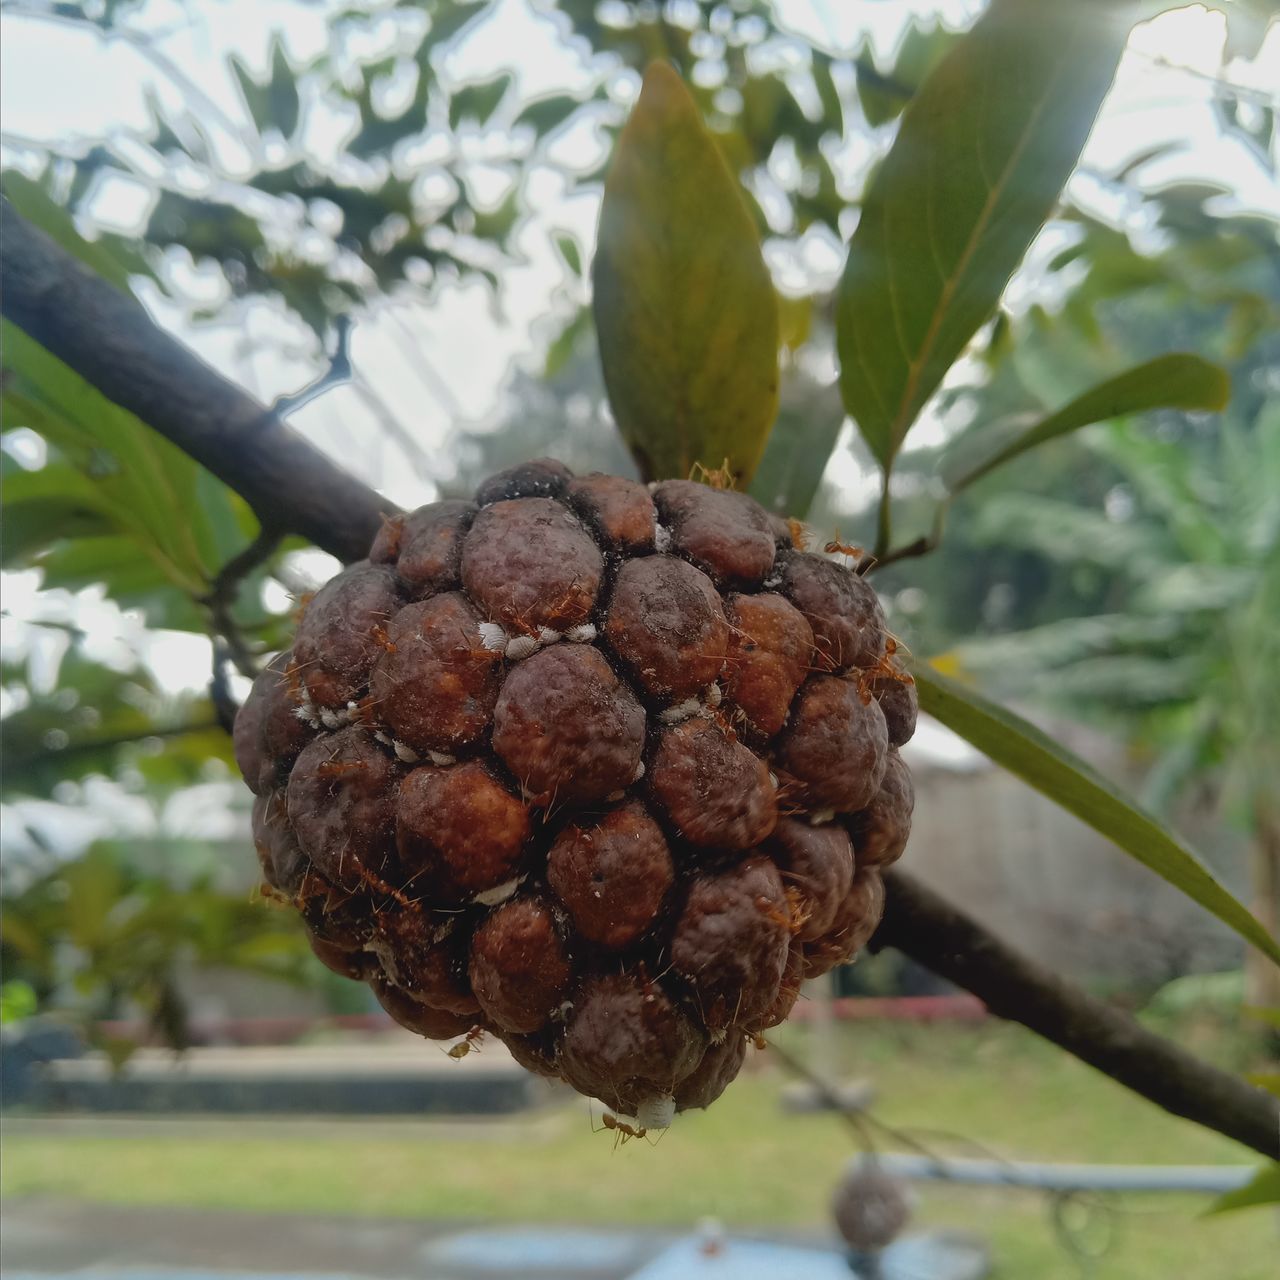 tree, plant, food, food and drink, produce, fruit, healthy eating, nature, branch, growth, close-up, no people, leaf, agriculture, plant part, conifer cone, focus on foreground, freshness, tropical fruit, outdoors, flower, wellbeing, day, ripe, beauty in nature